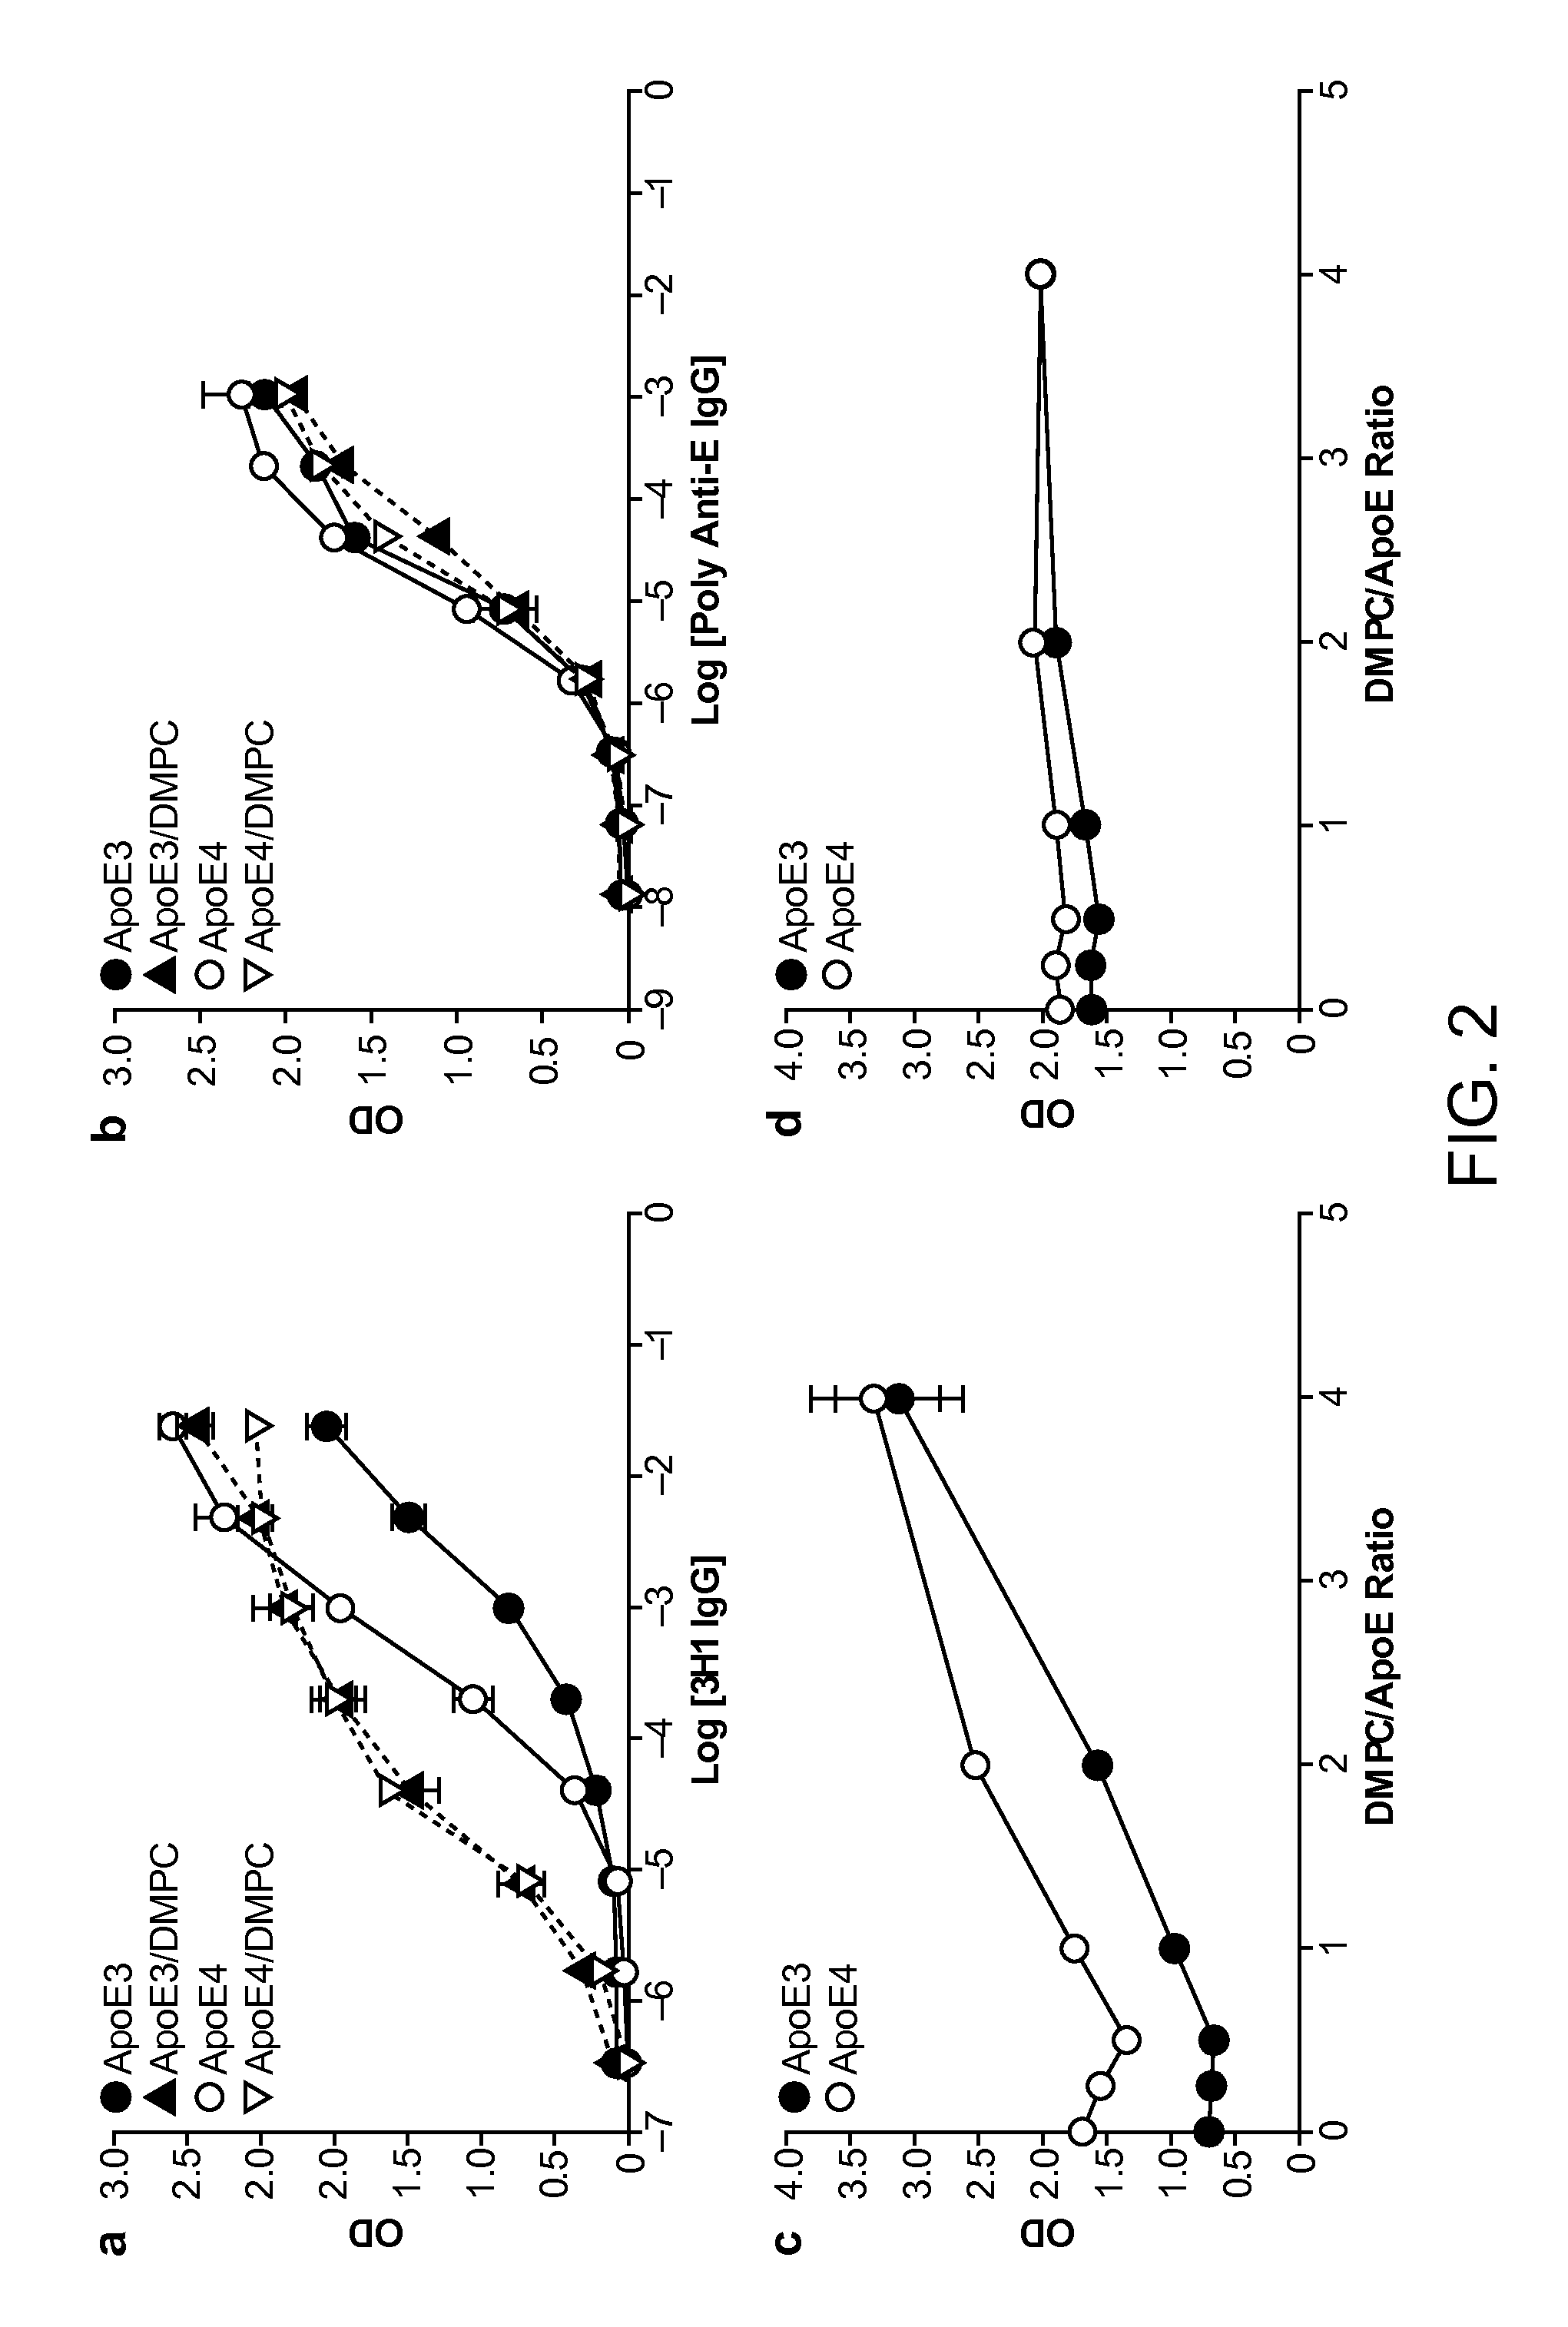 Antibody Specific for Apolipoprotein and Methods of Use Thereof